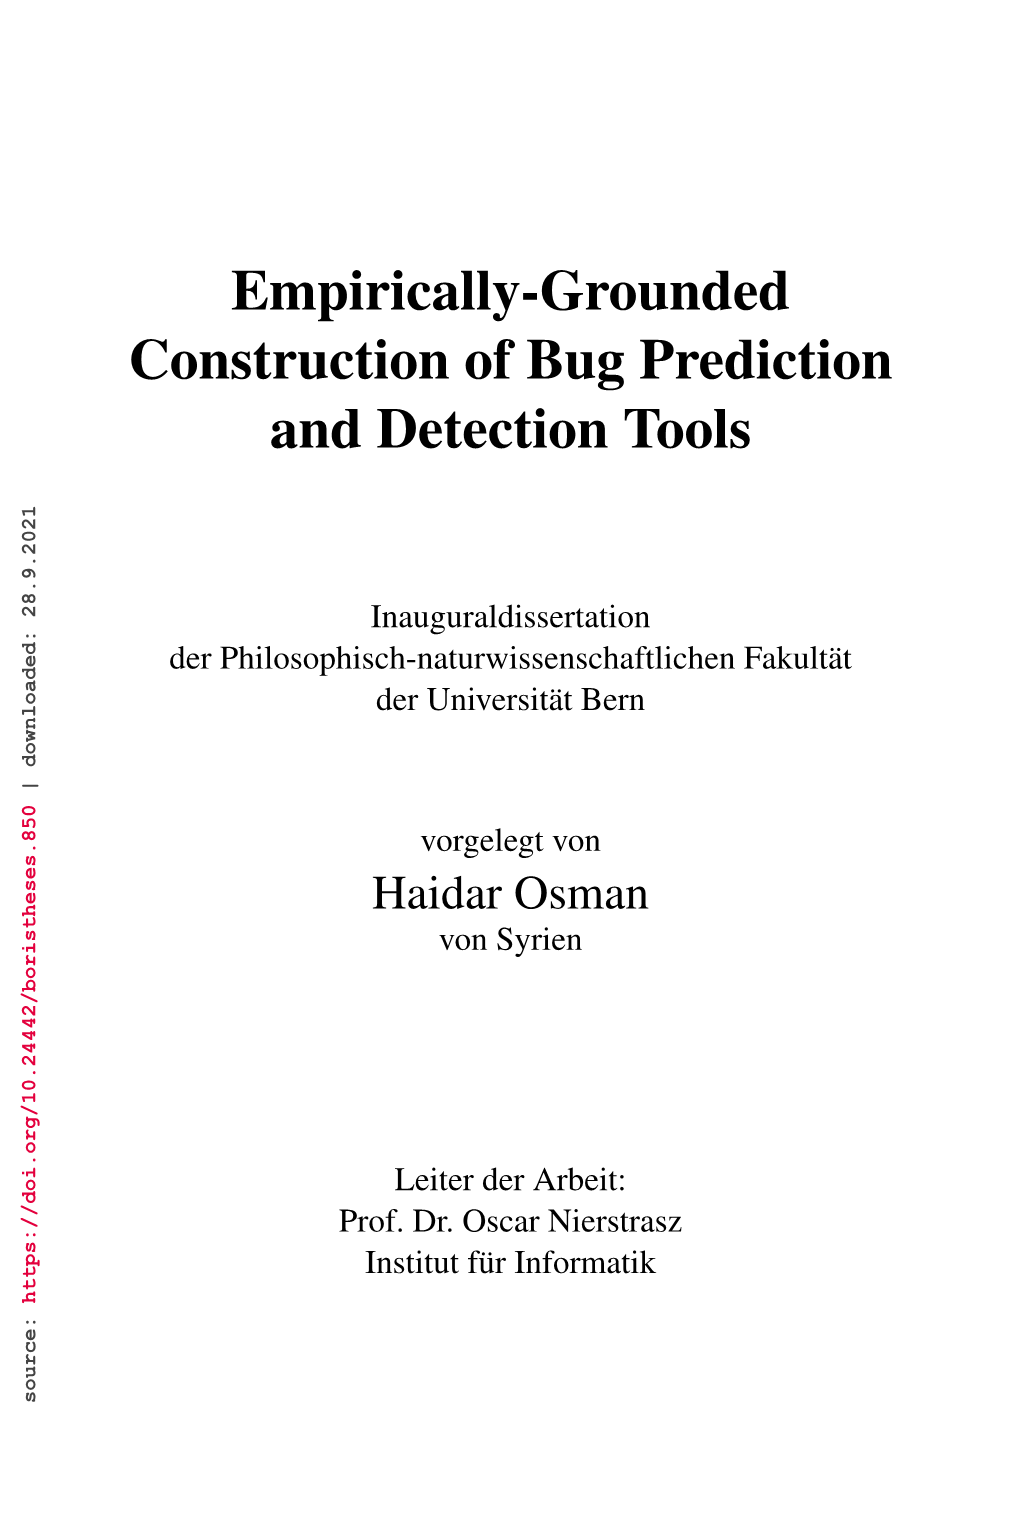 Empirically-Grounded Construction of Bug Prediction and Detection Tools